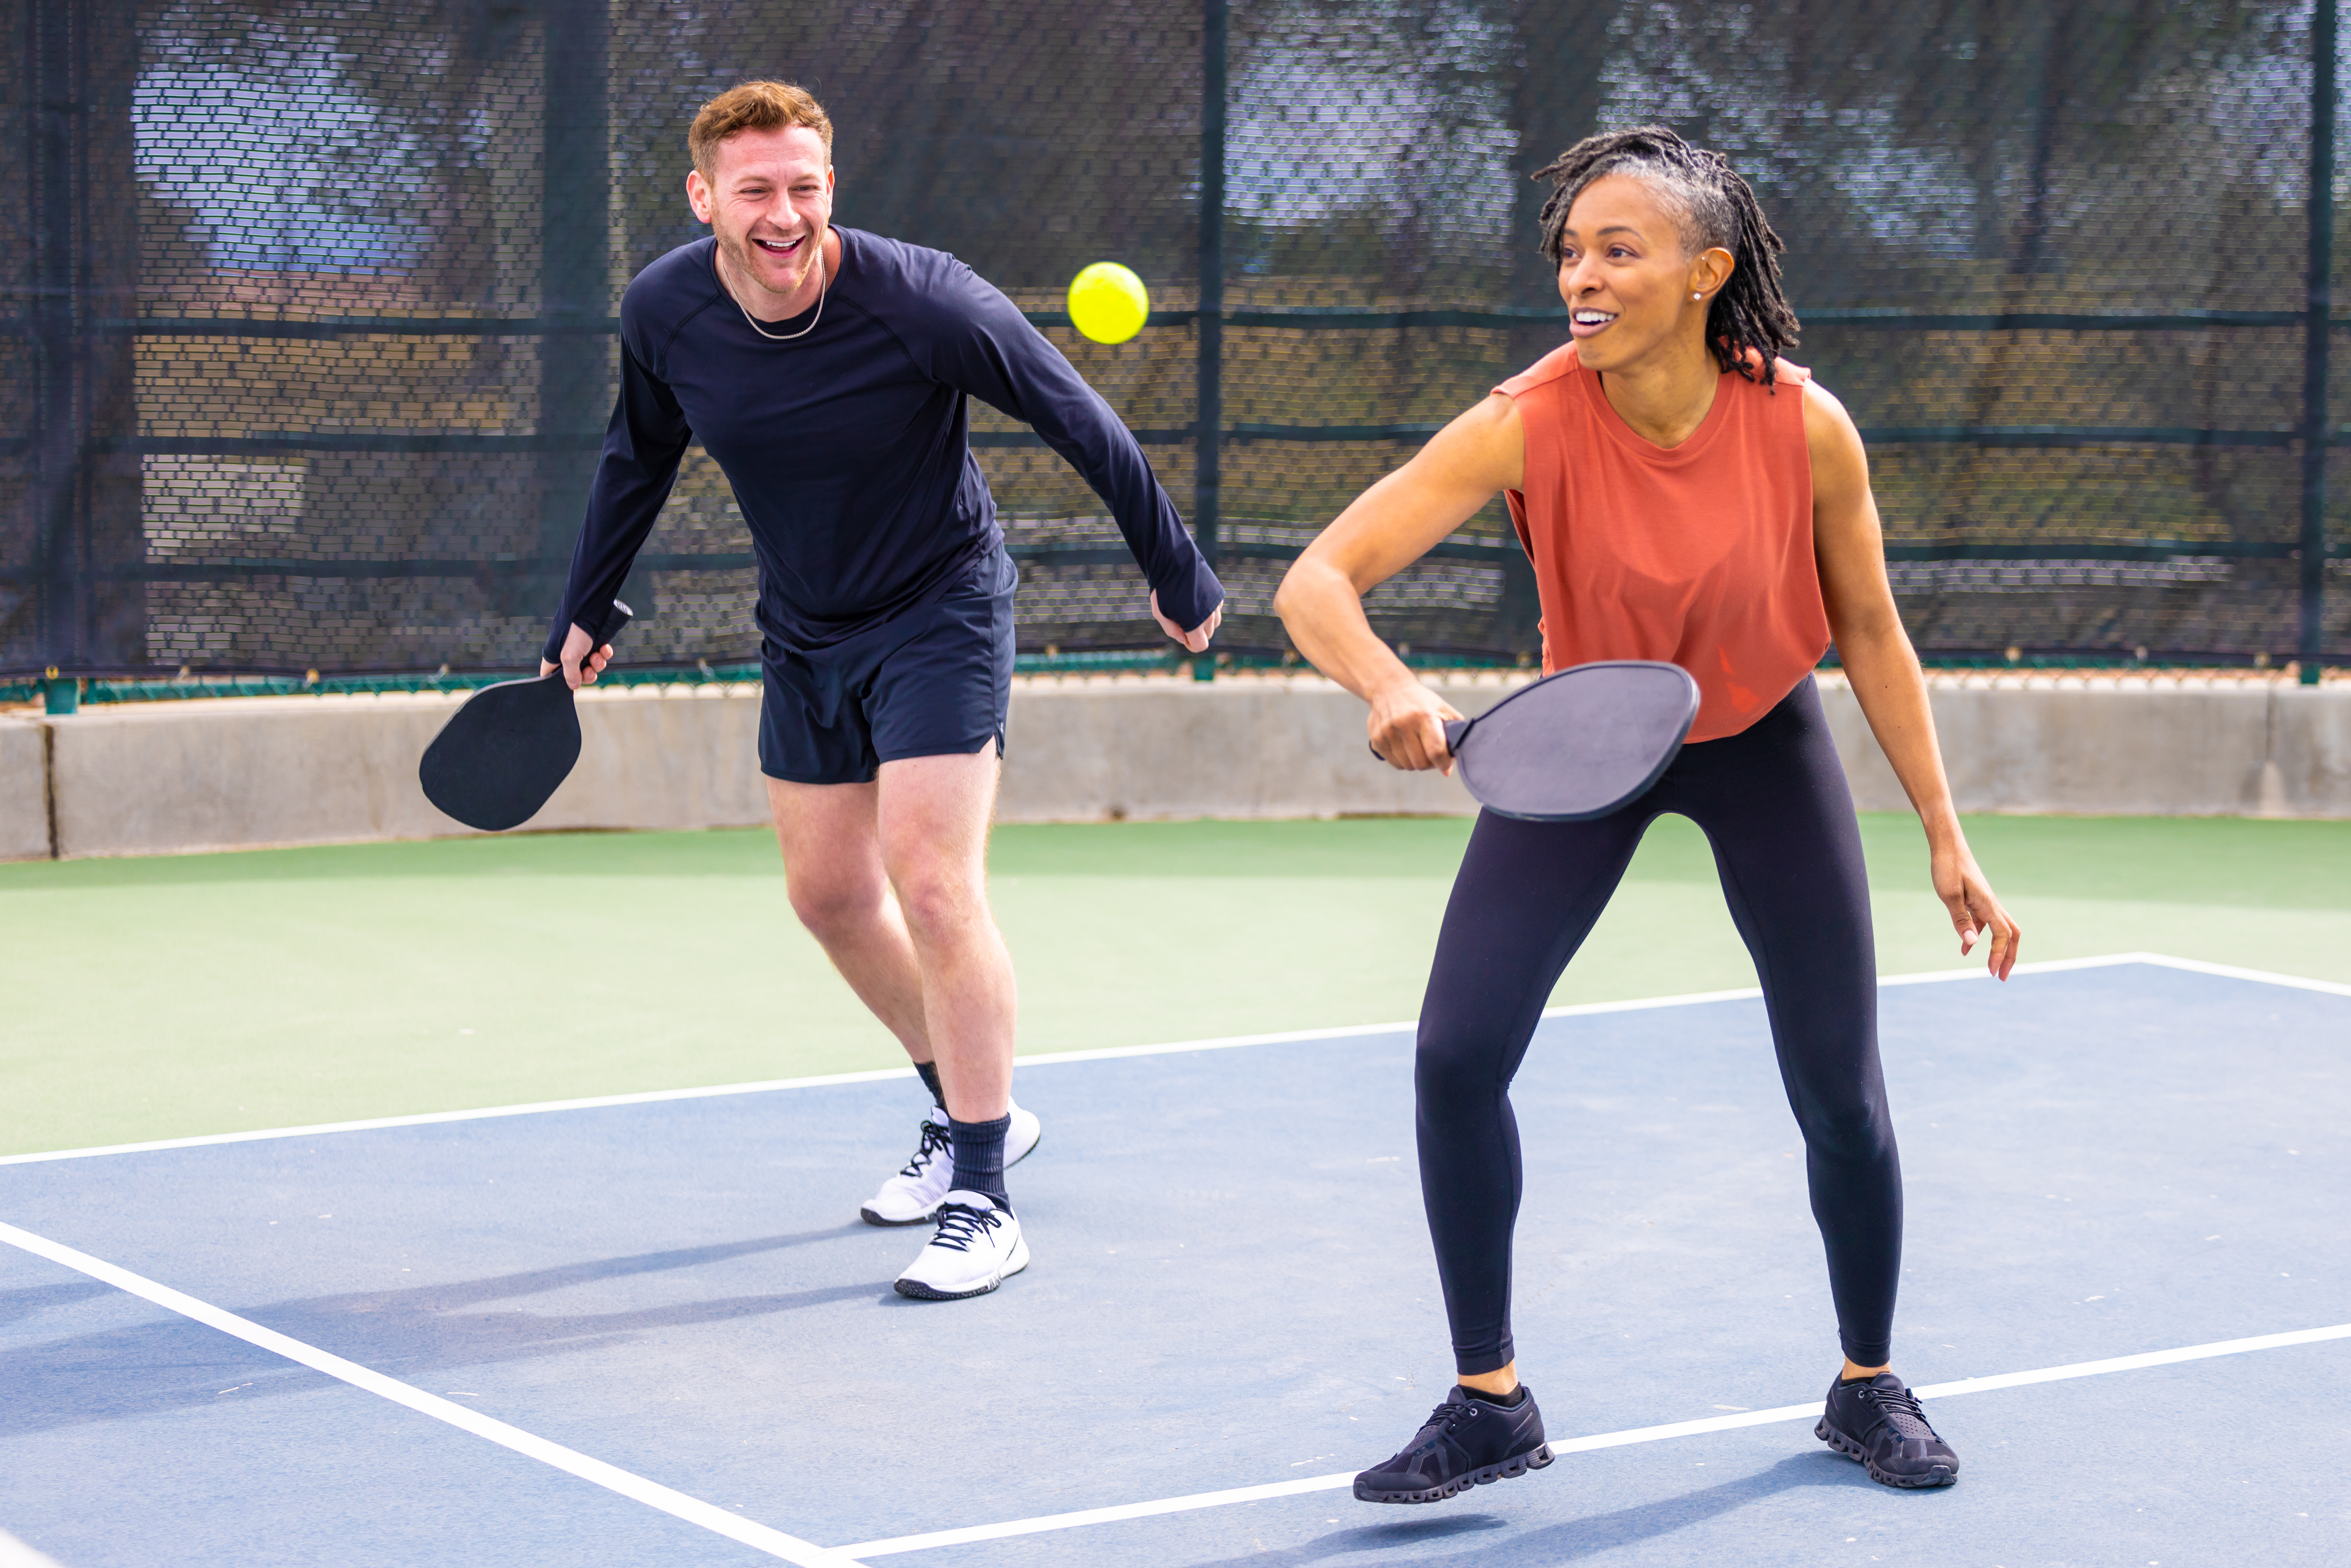 Black woman playing pickleball with white male partner on an outdoor court.